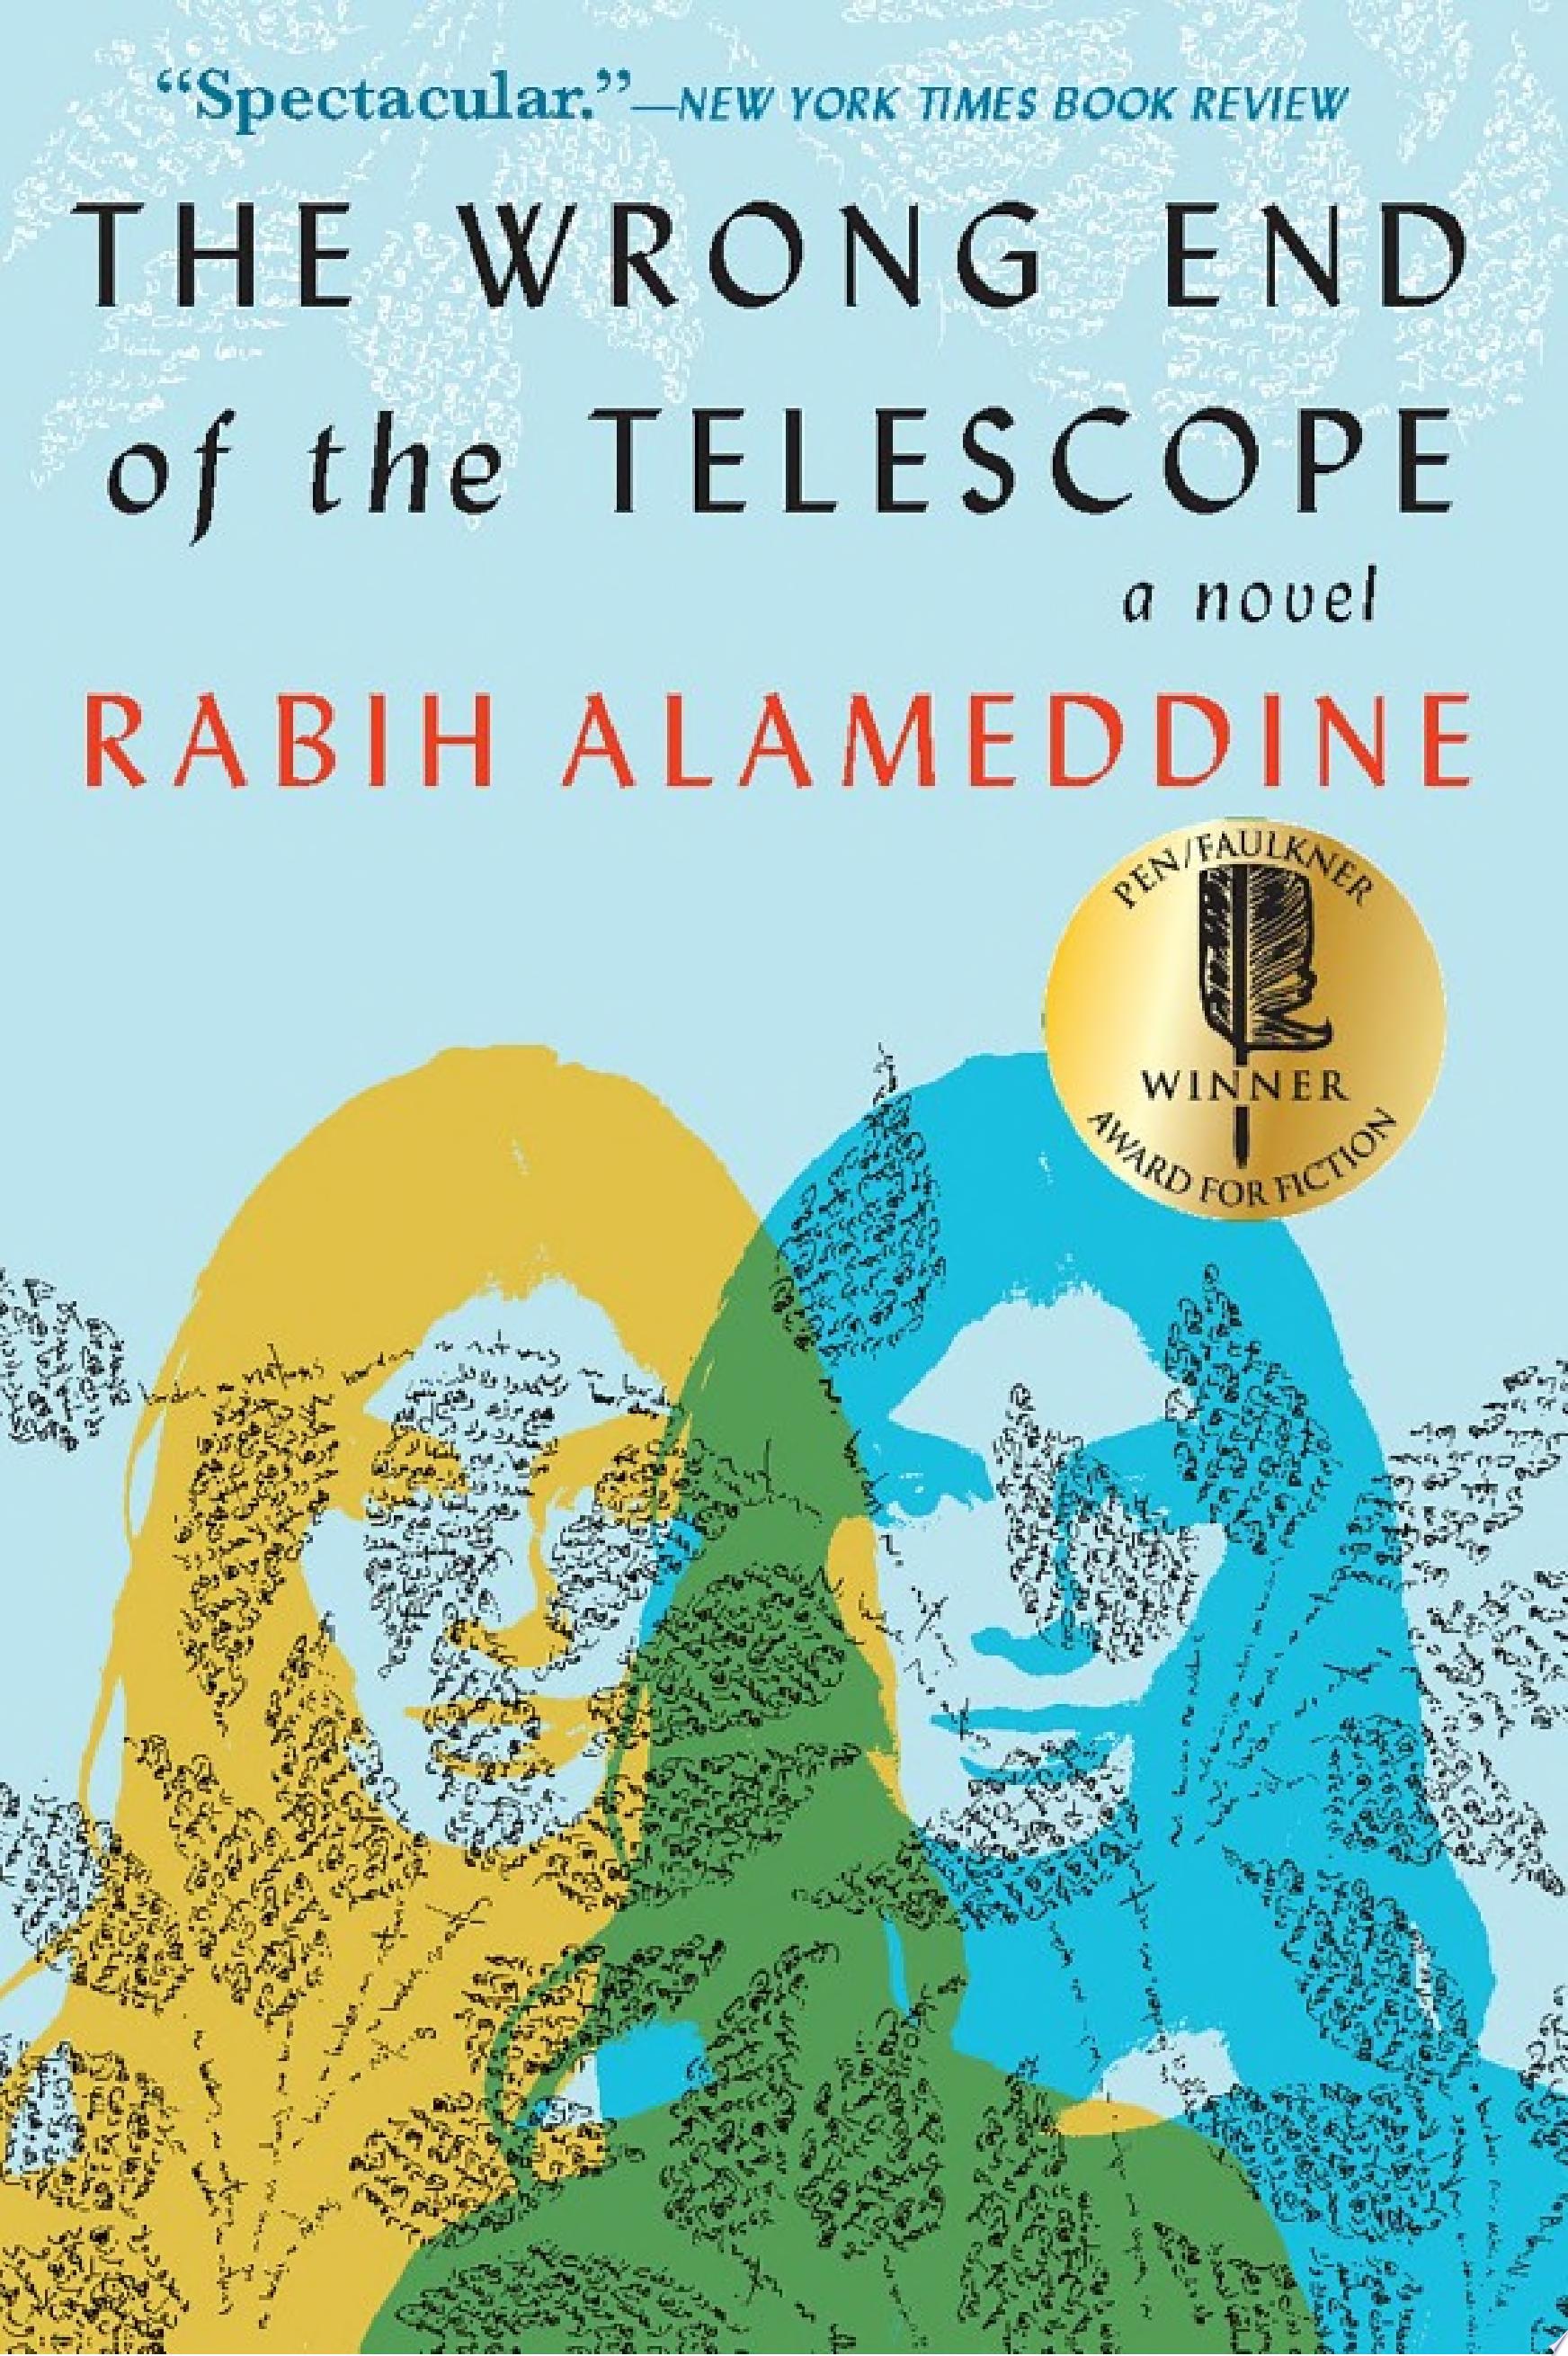 Image for "The Wrong End of the Telescope"